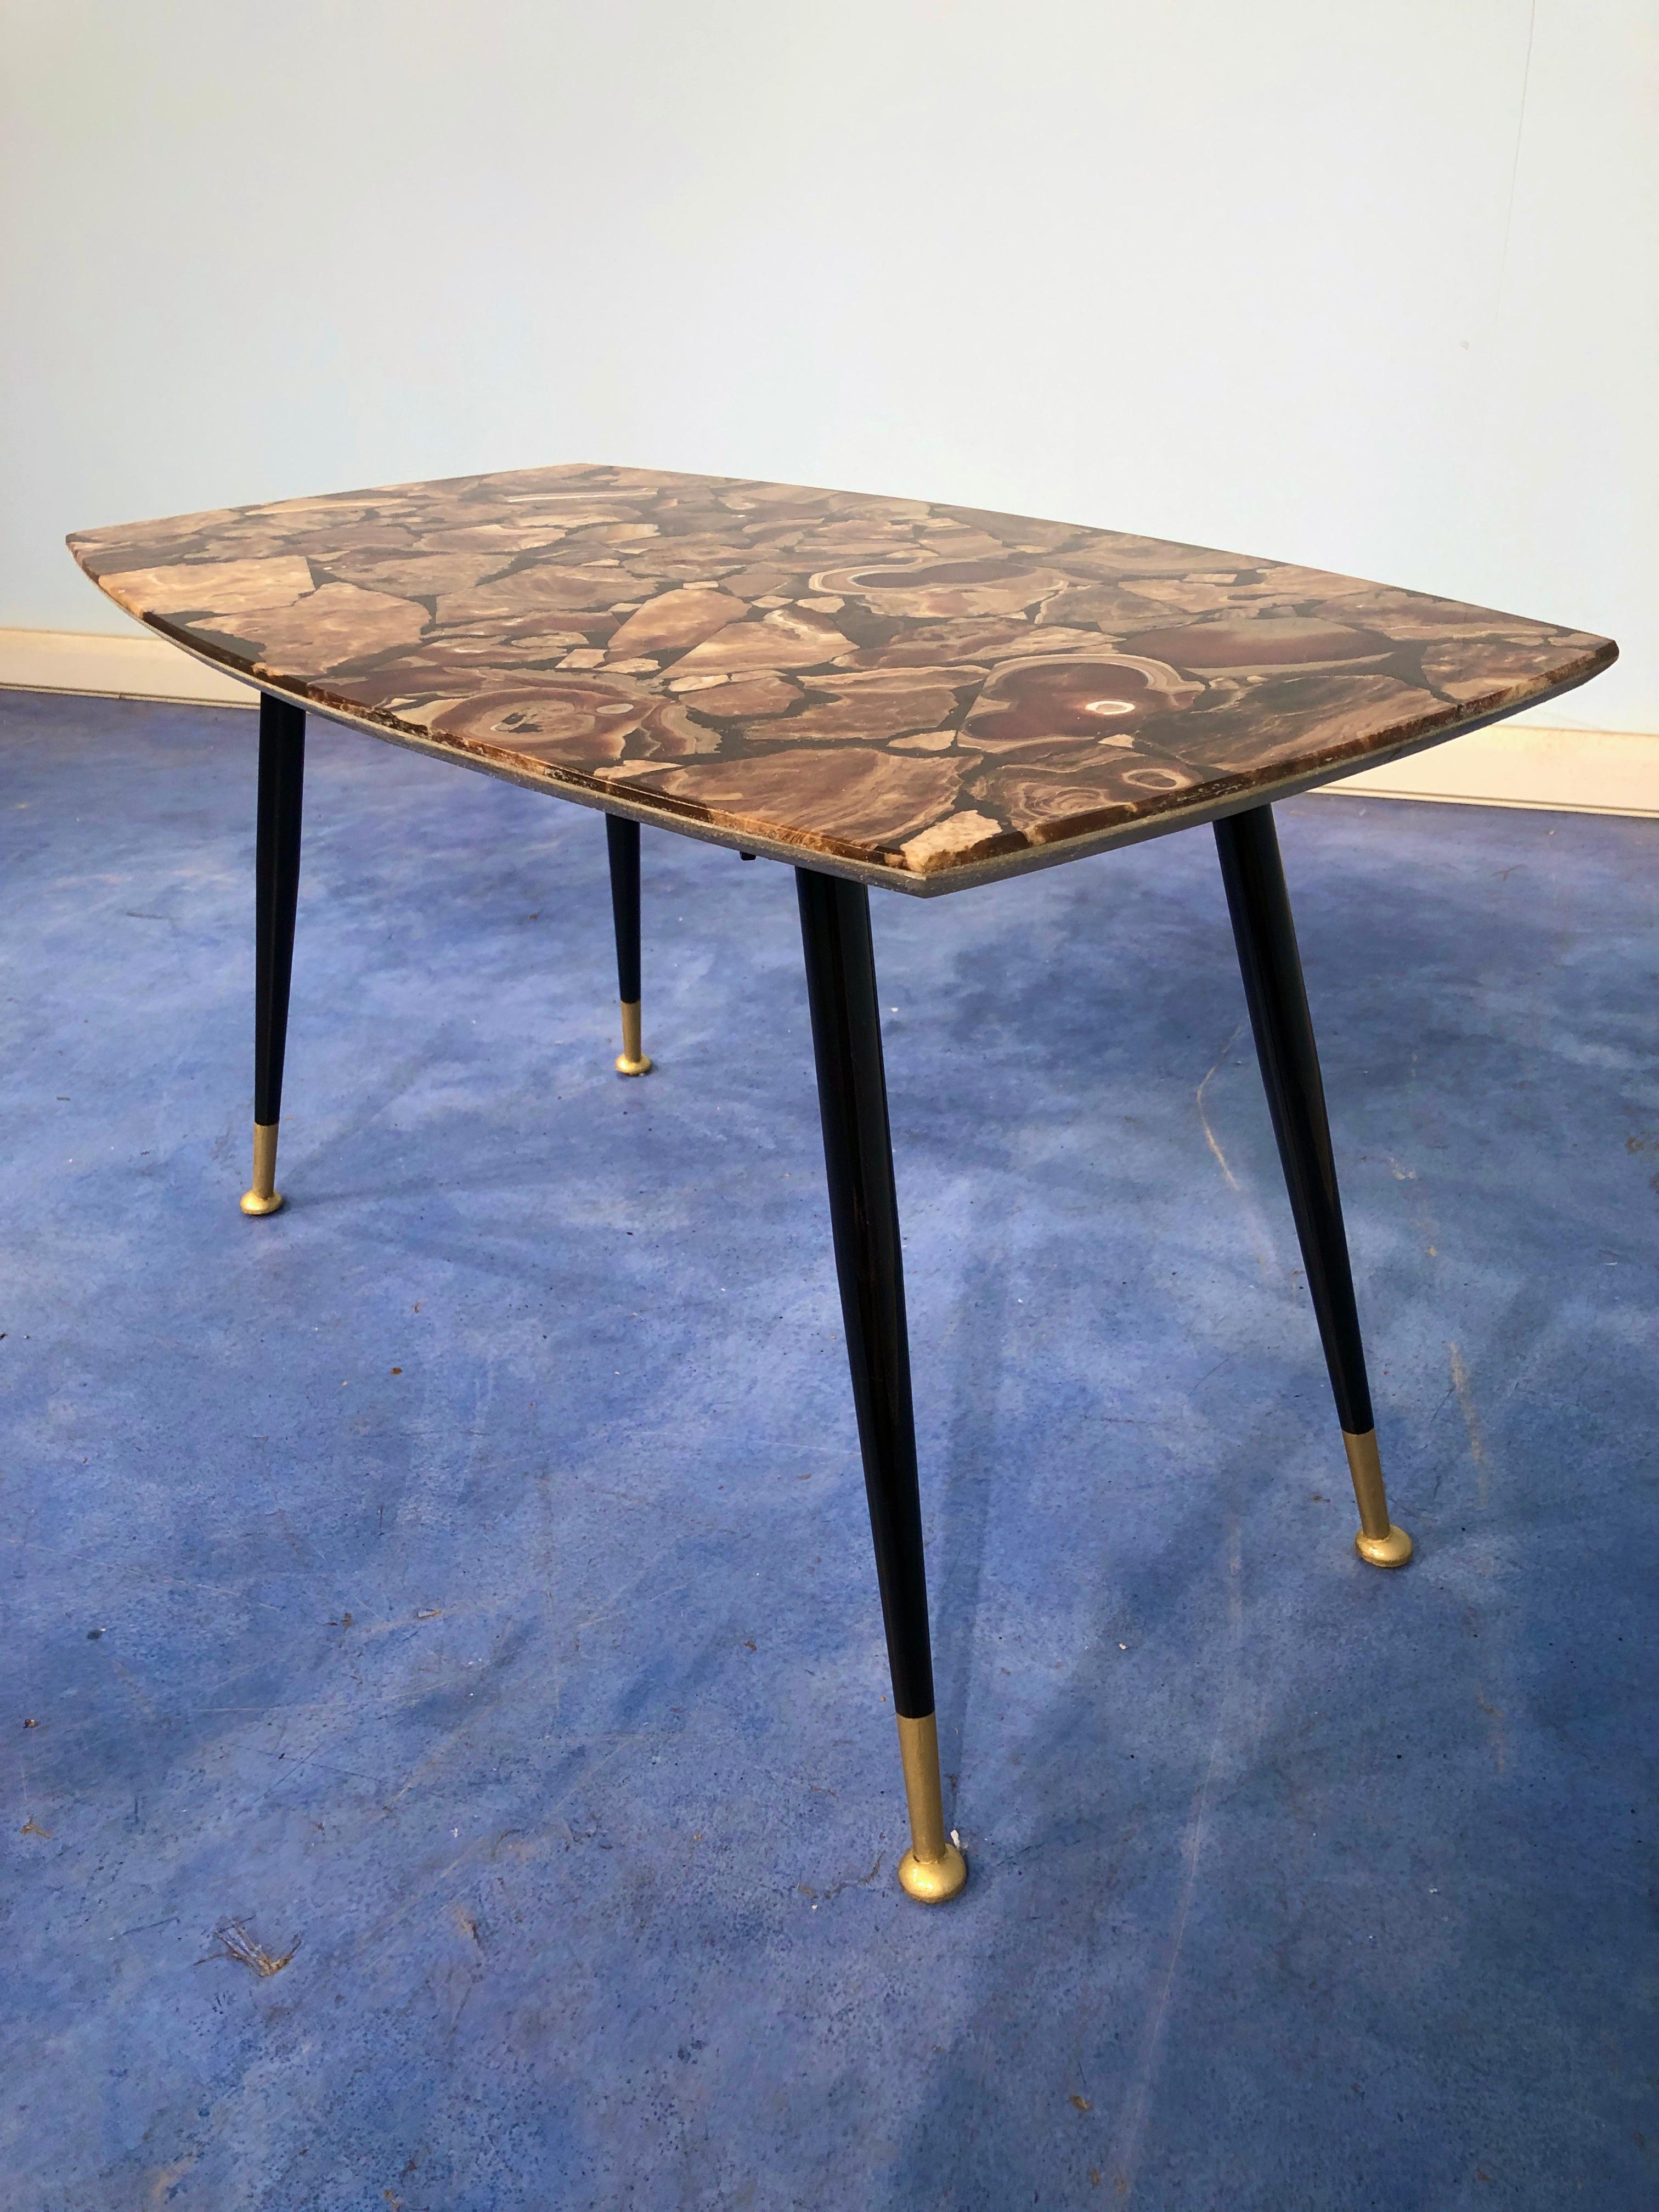 Italian Midcentury Mosaic Marble Coffee Table, 1950 For Sale 1